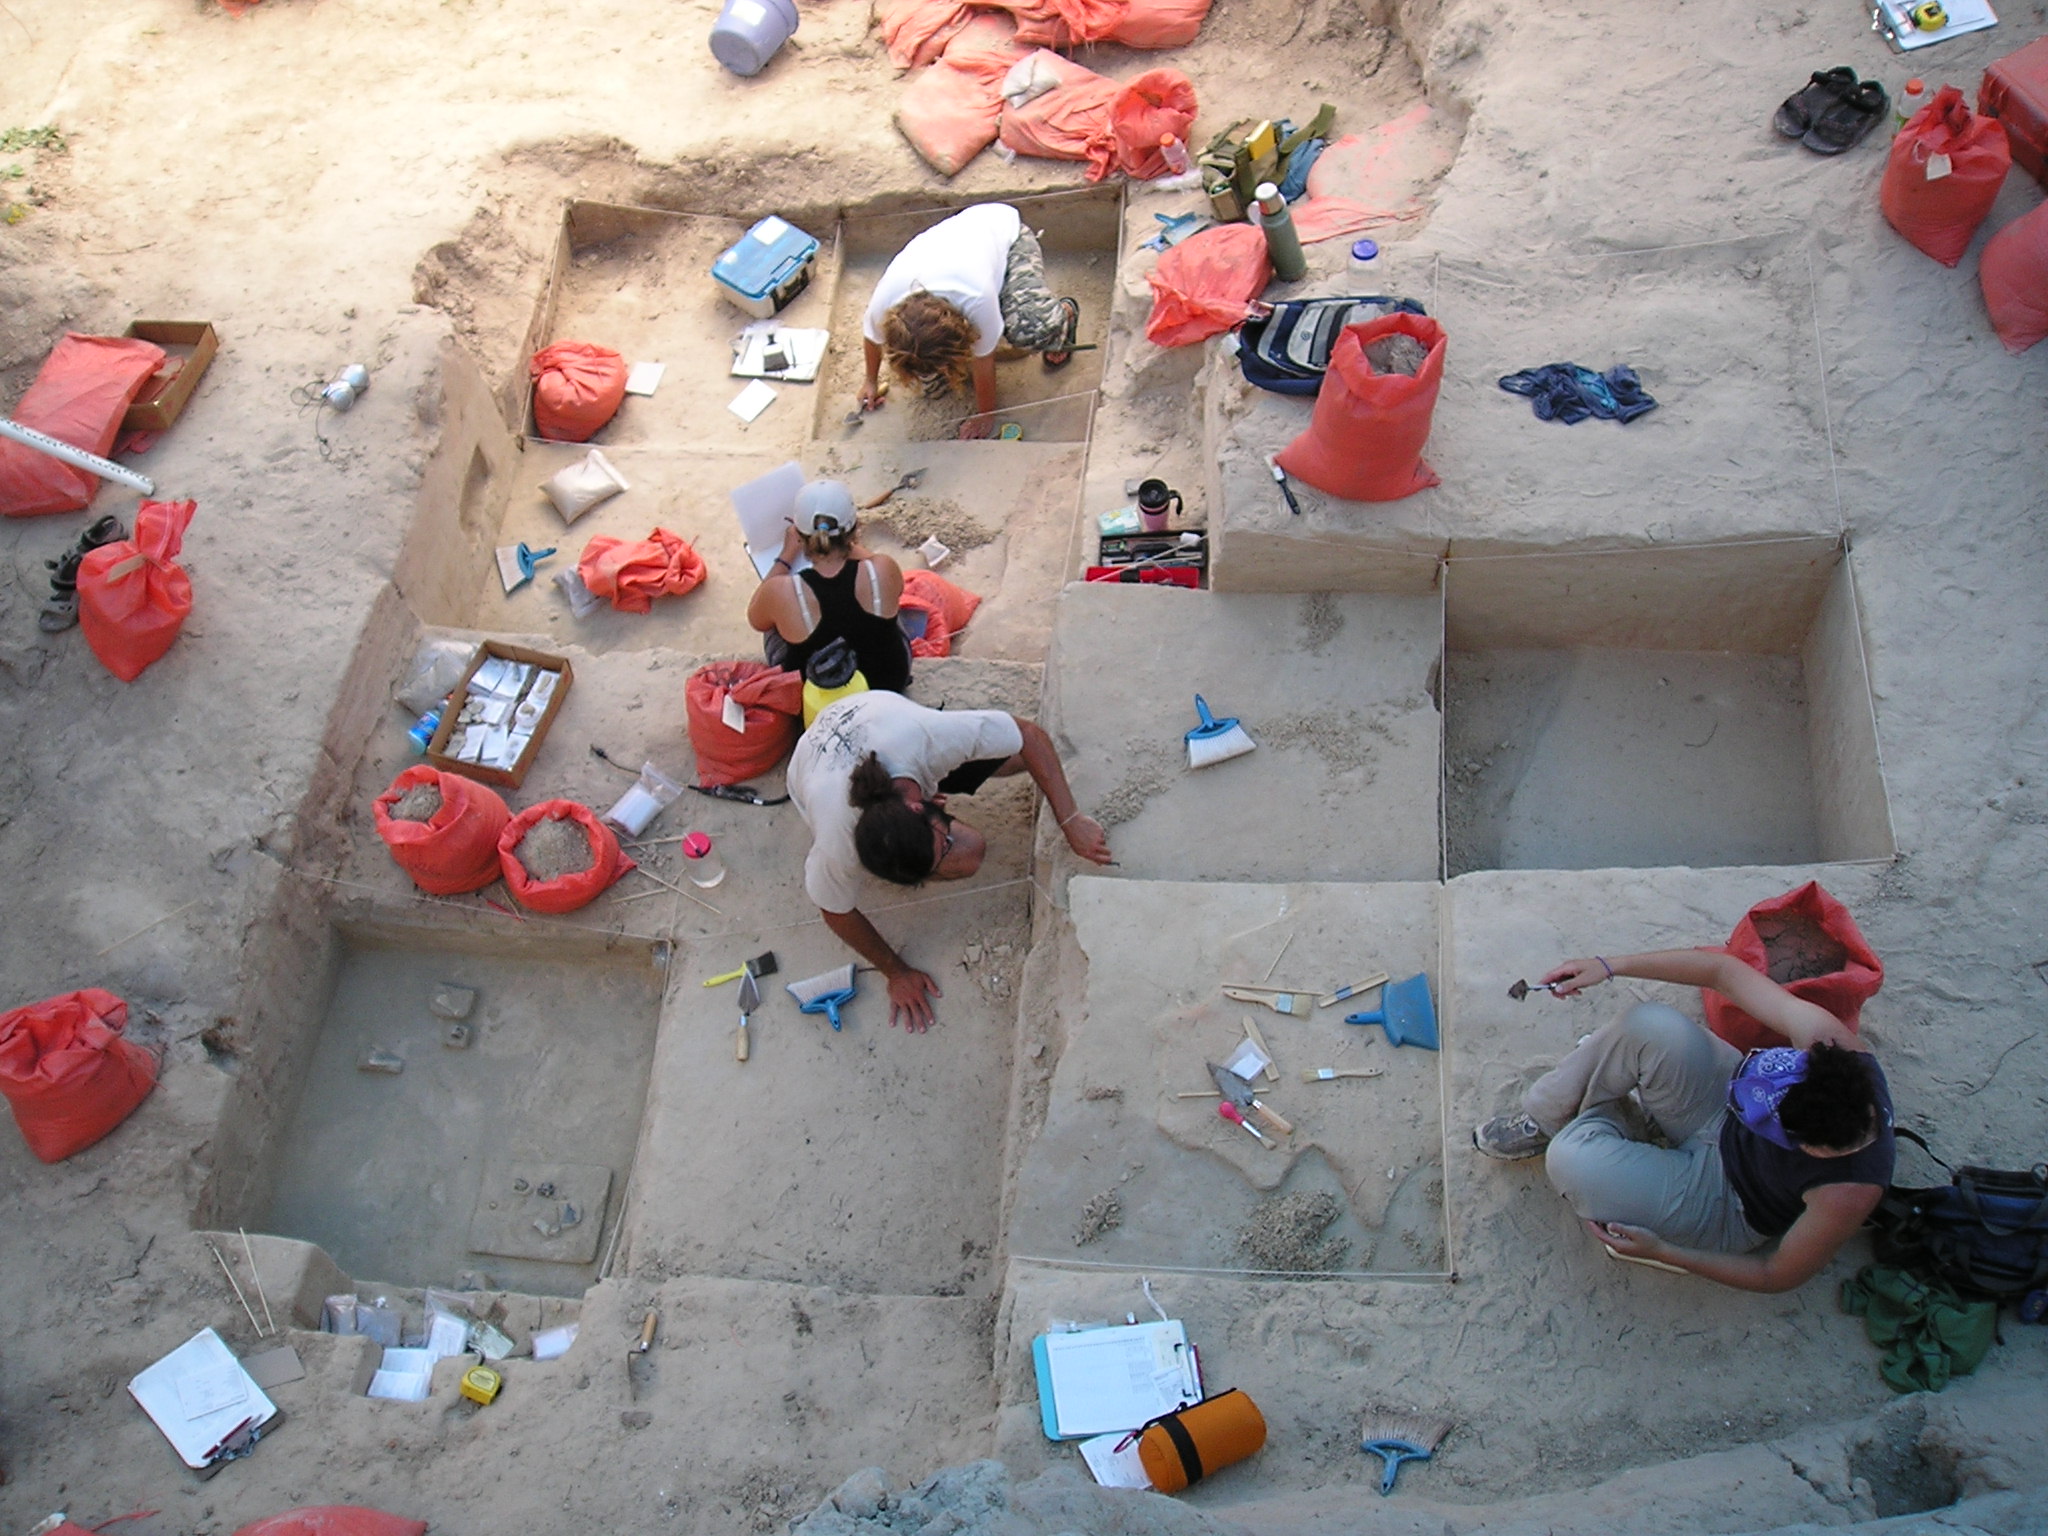 Overhead view of excavation units